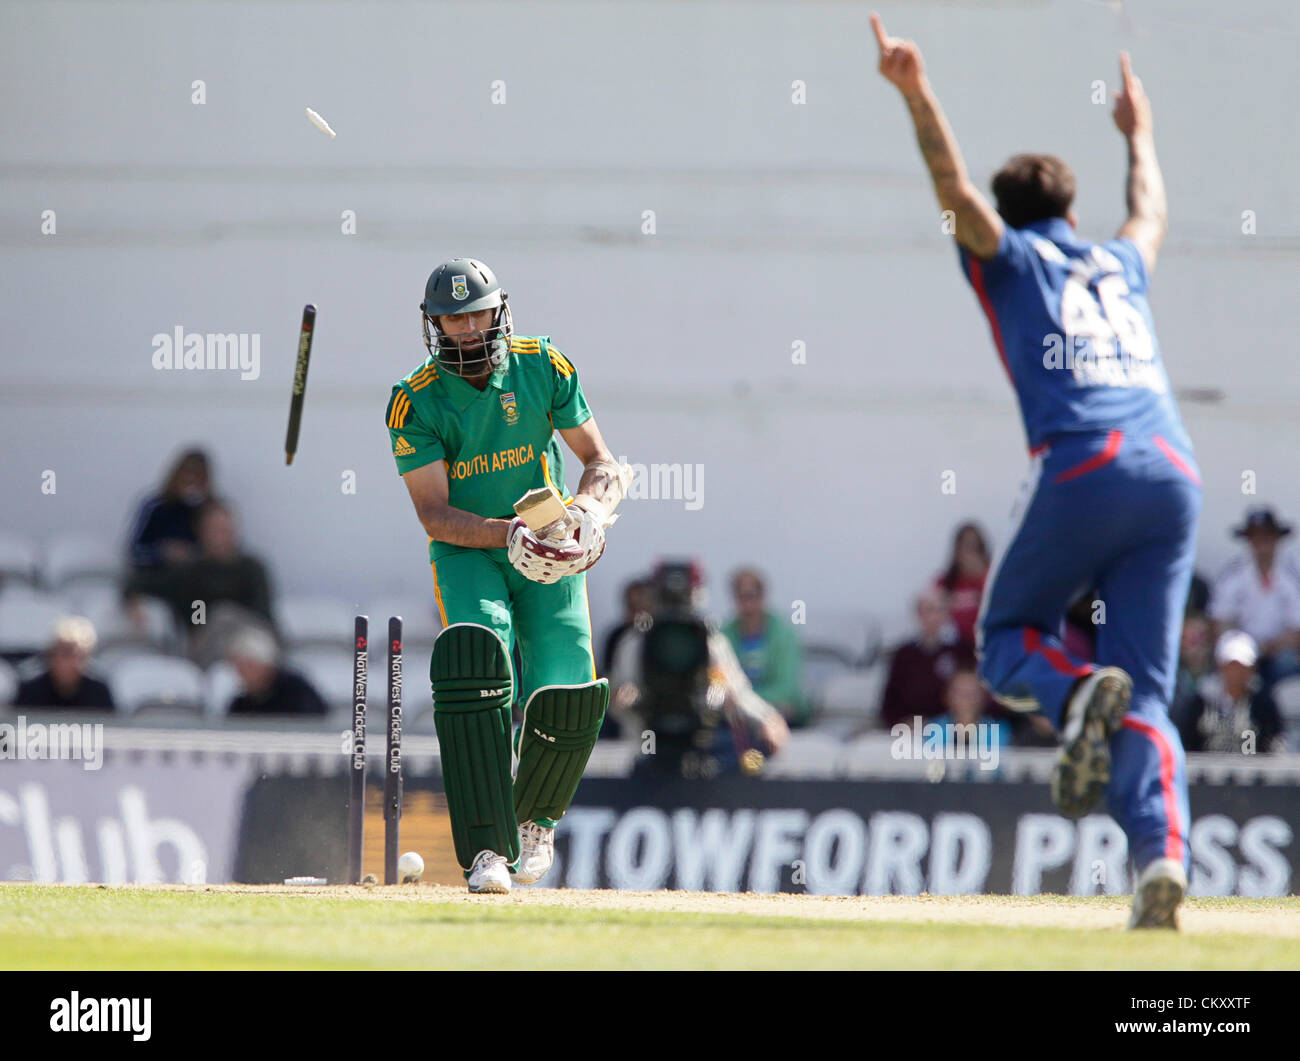 31-08-2012 London England Hashim Amla has his stumps flying bowled by Jade Derbach during the England v South Africa: 3rd Natwest ODI at The Kia Oval Cricket Ground Kennington London England. Stock Photo